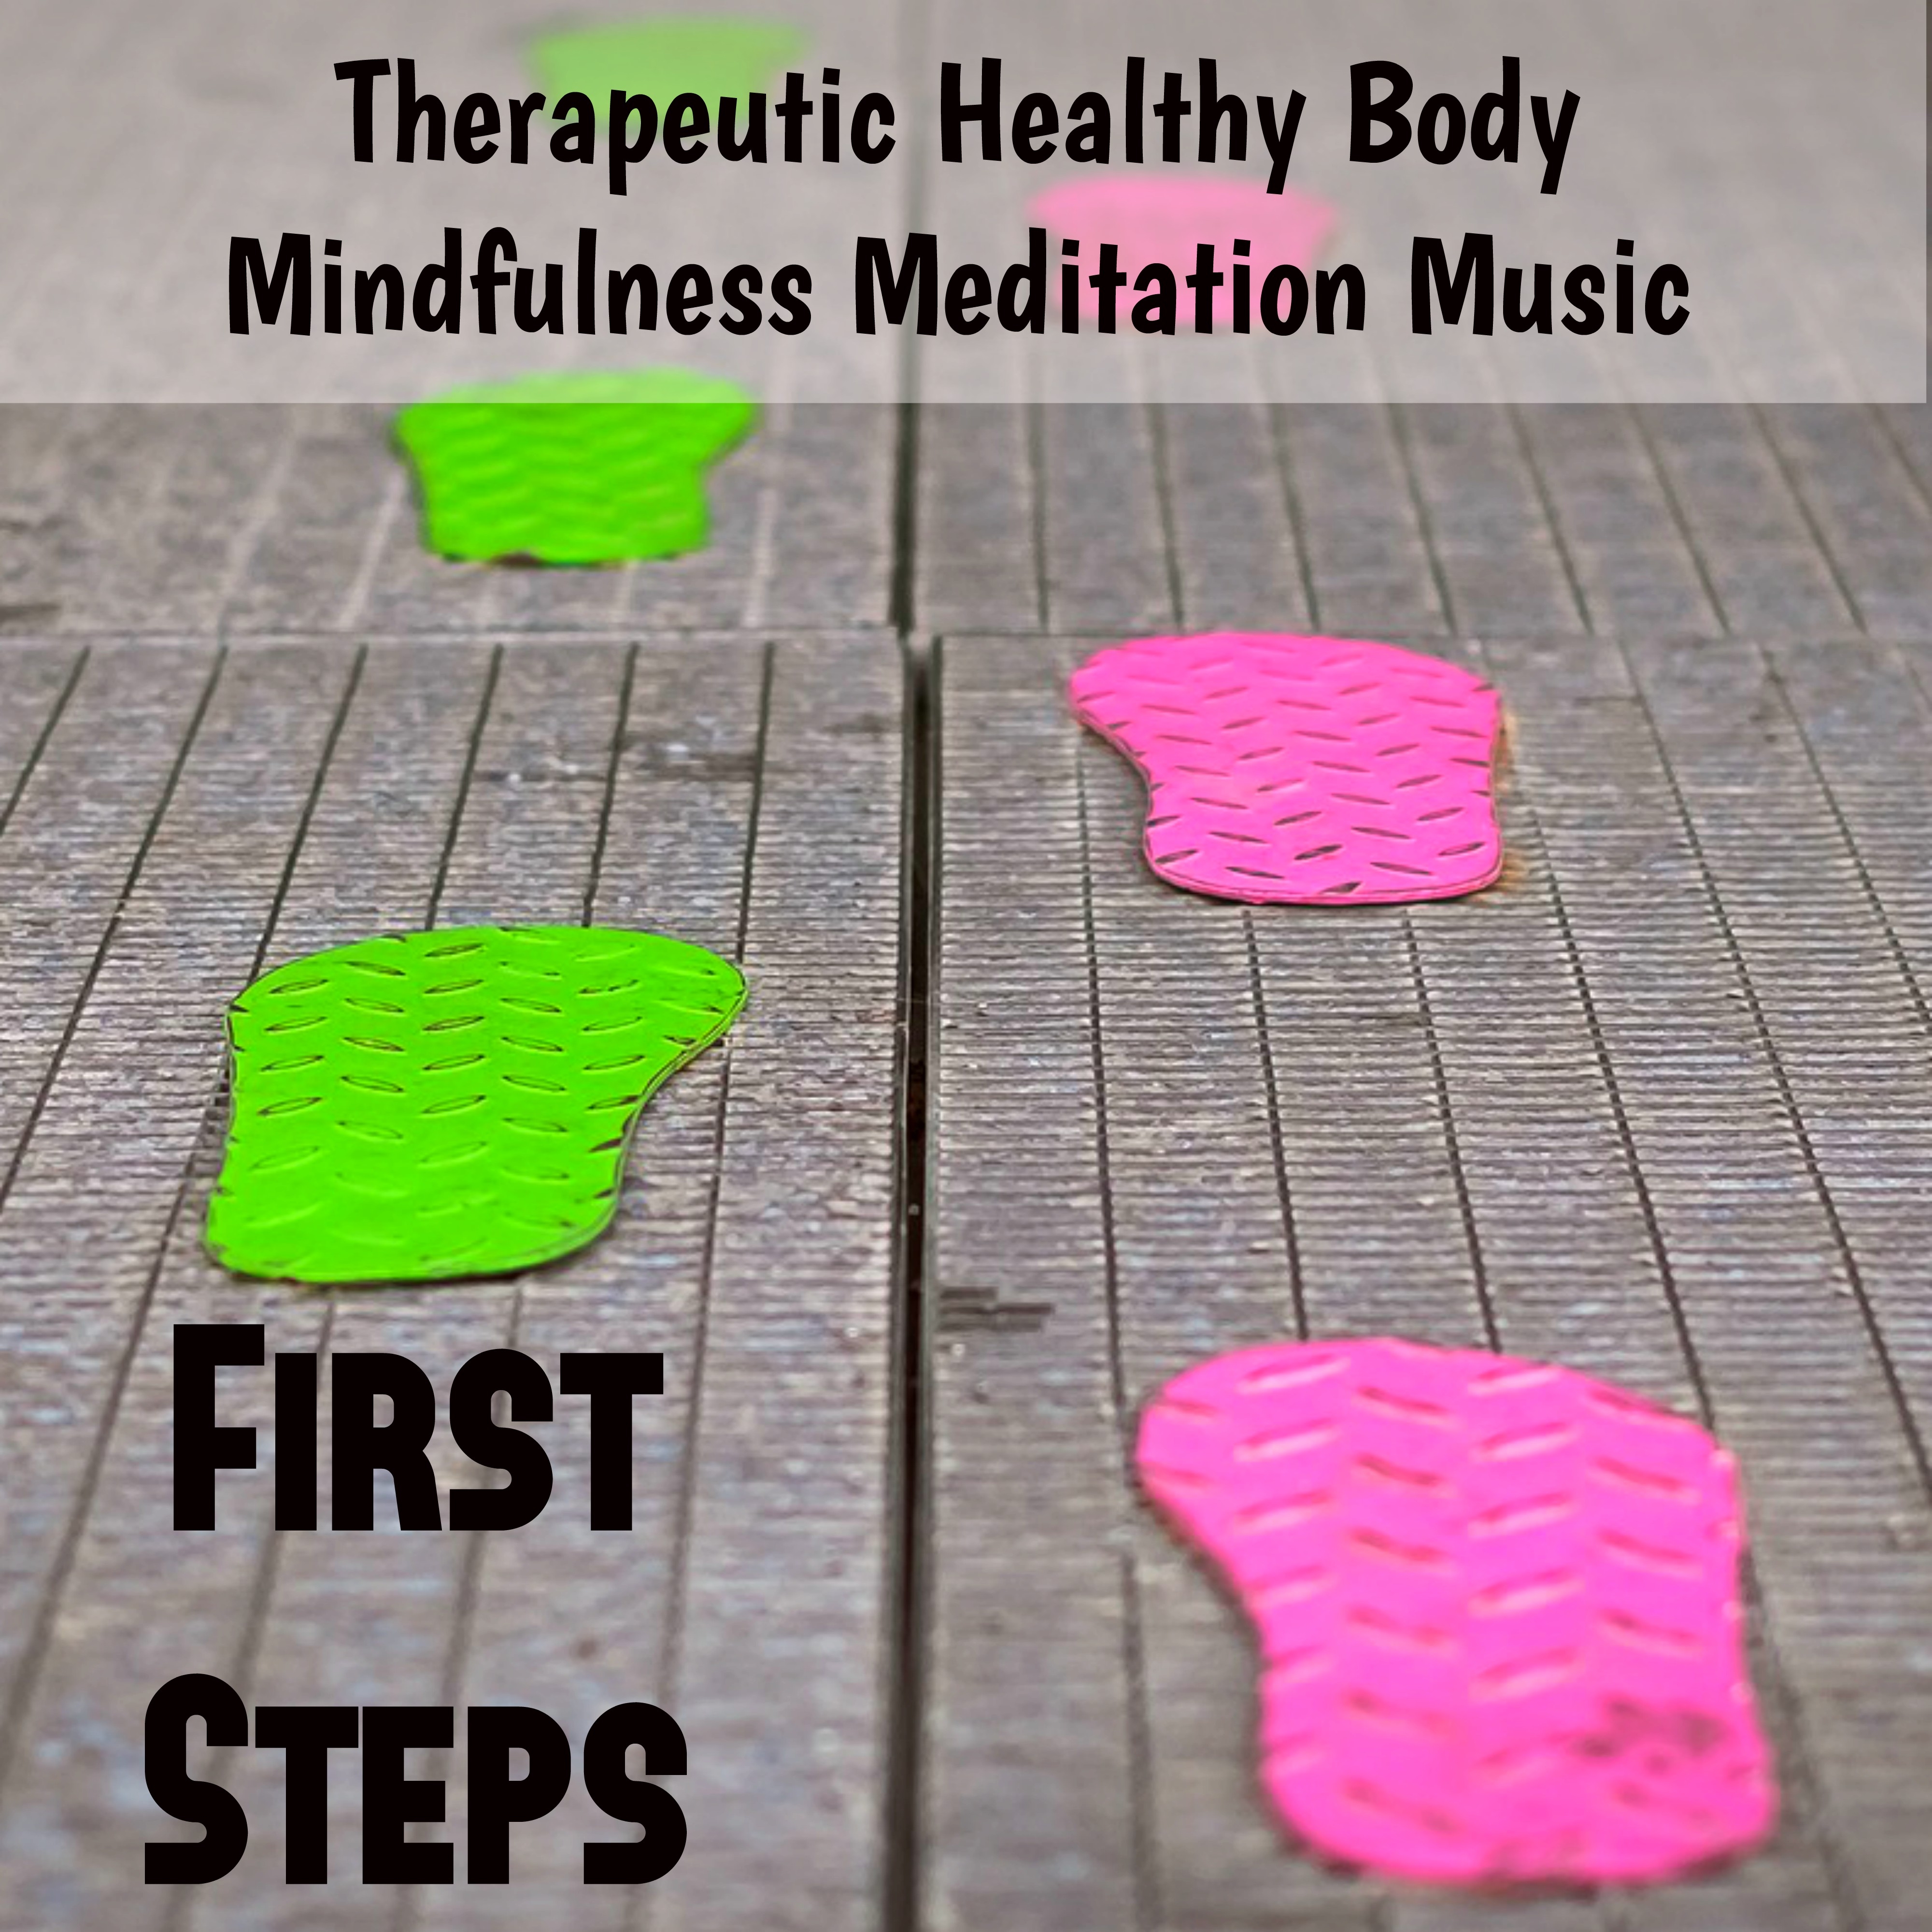 First Steps - Therapeutic Healthy Body Mindfulness Meditation Music for Spa Holidays Brainwave Entrainment Biofeedback Training with Nature New Age Bio Energy Relaxing Sounds